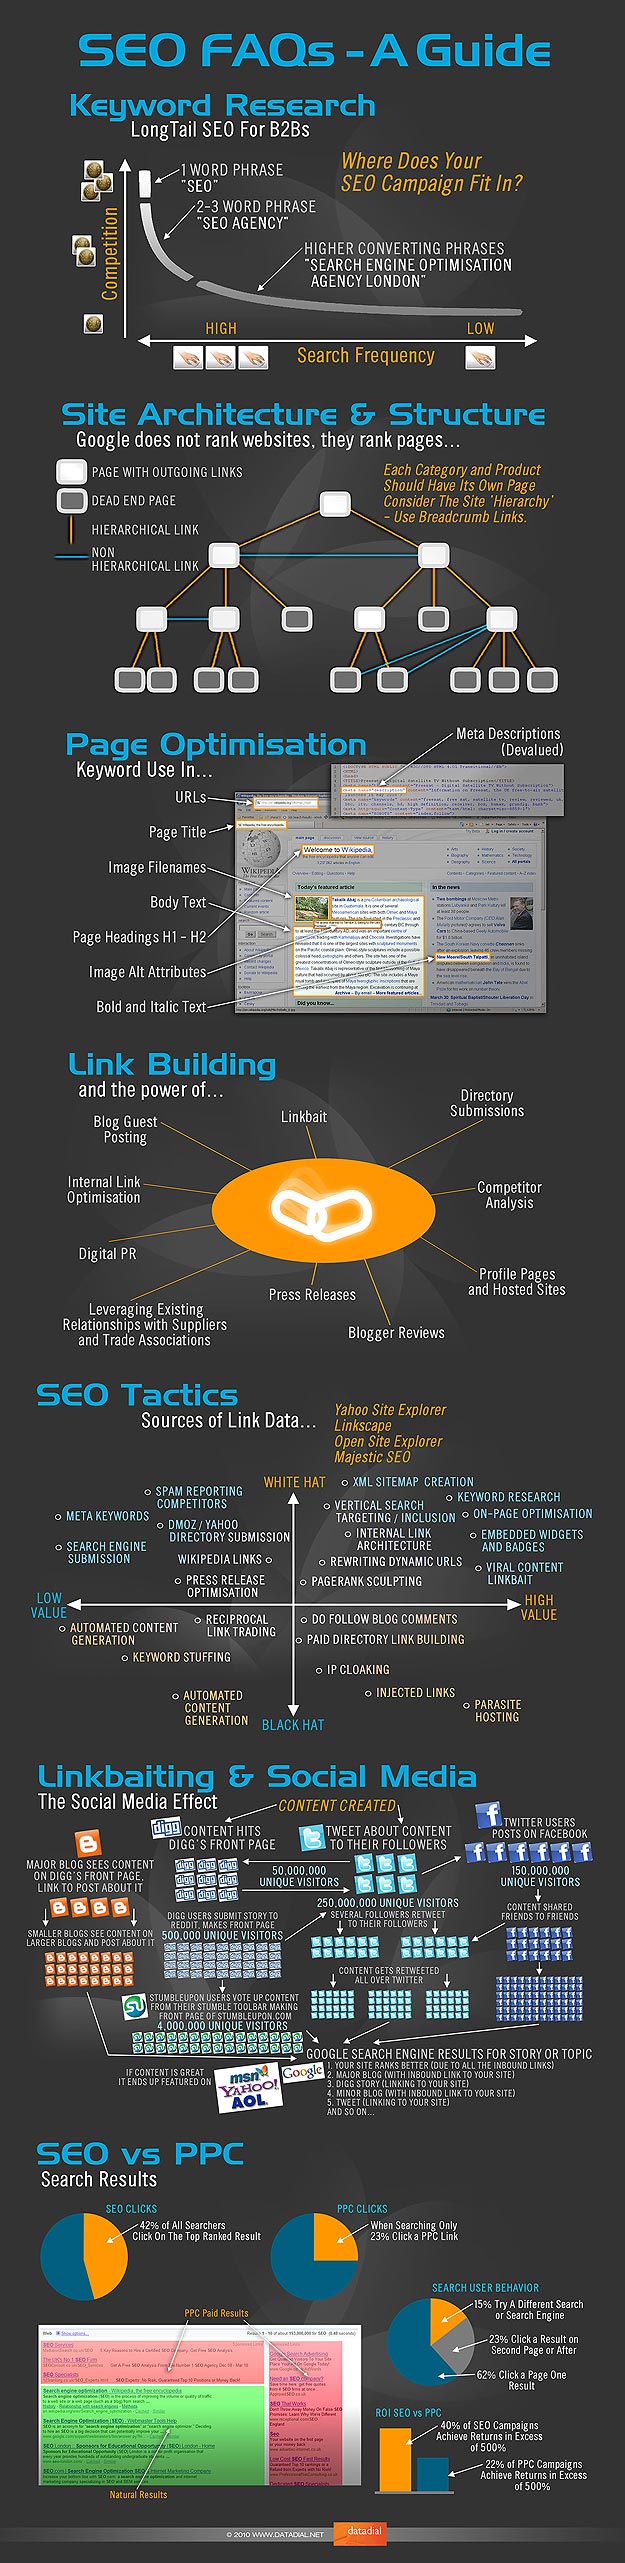 SEO for Dummies Infographic